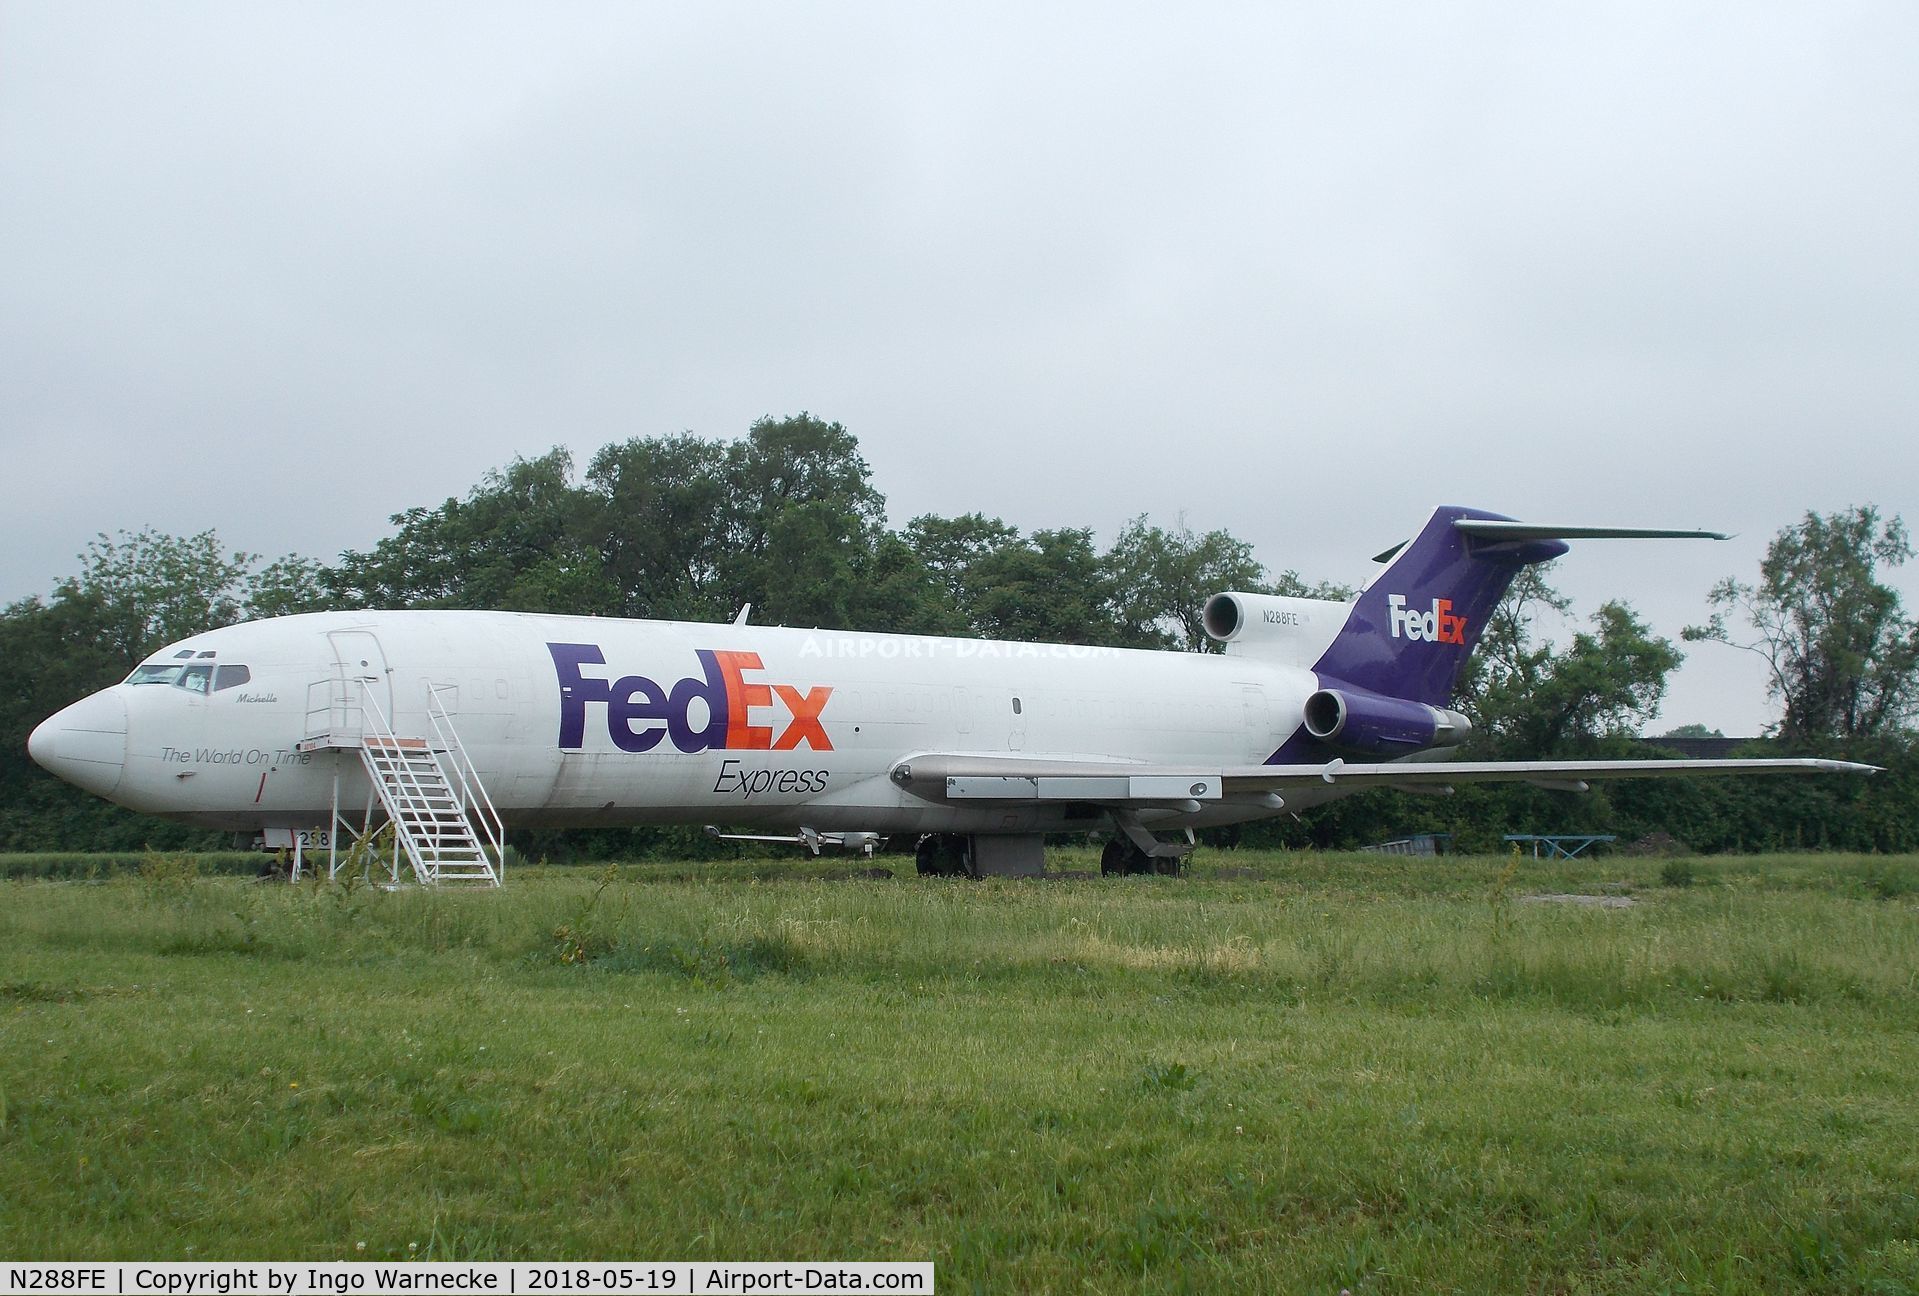 N288FE, 1979 Boeing 727-2D4 C/N 21850, Boeing 727-2D4 preserved at the St. Louis Downtown Airport, Cahokia IL